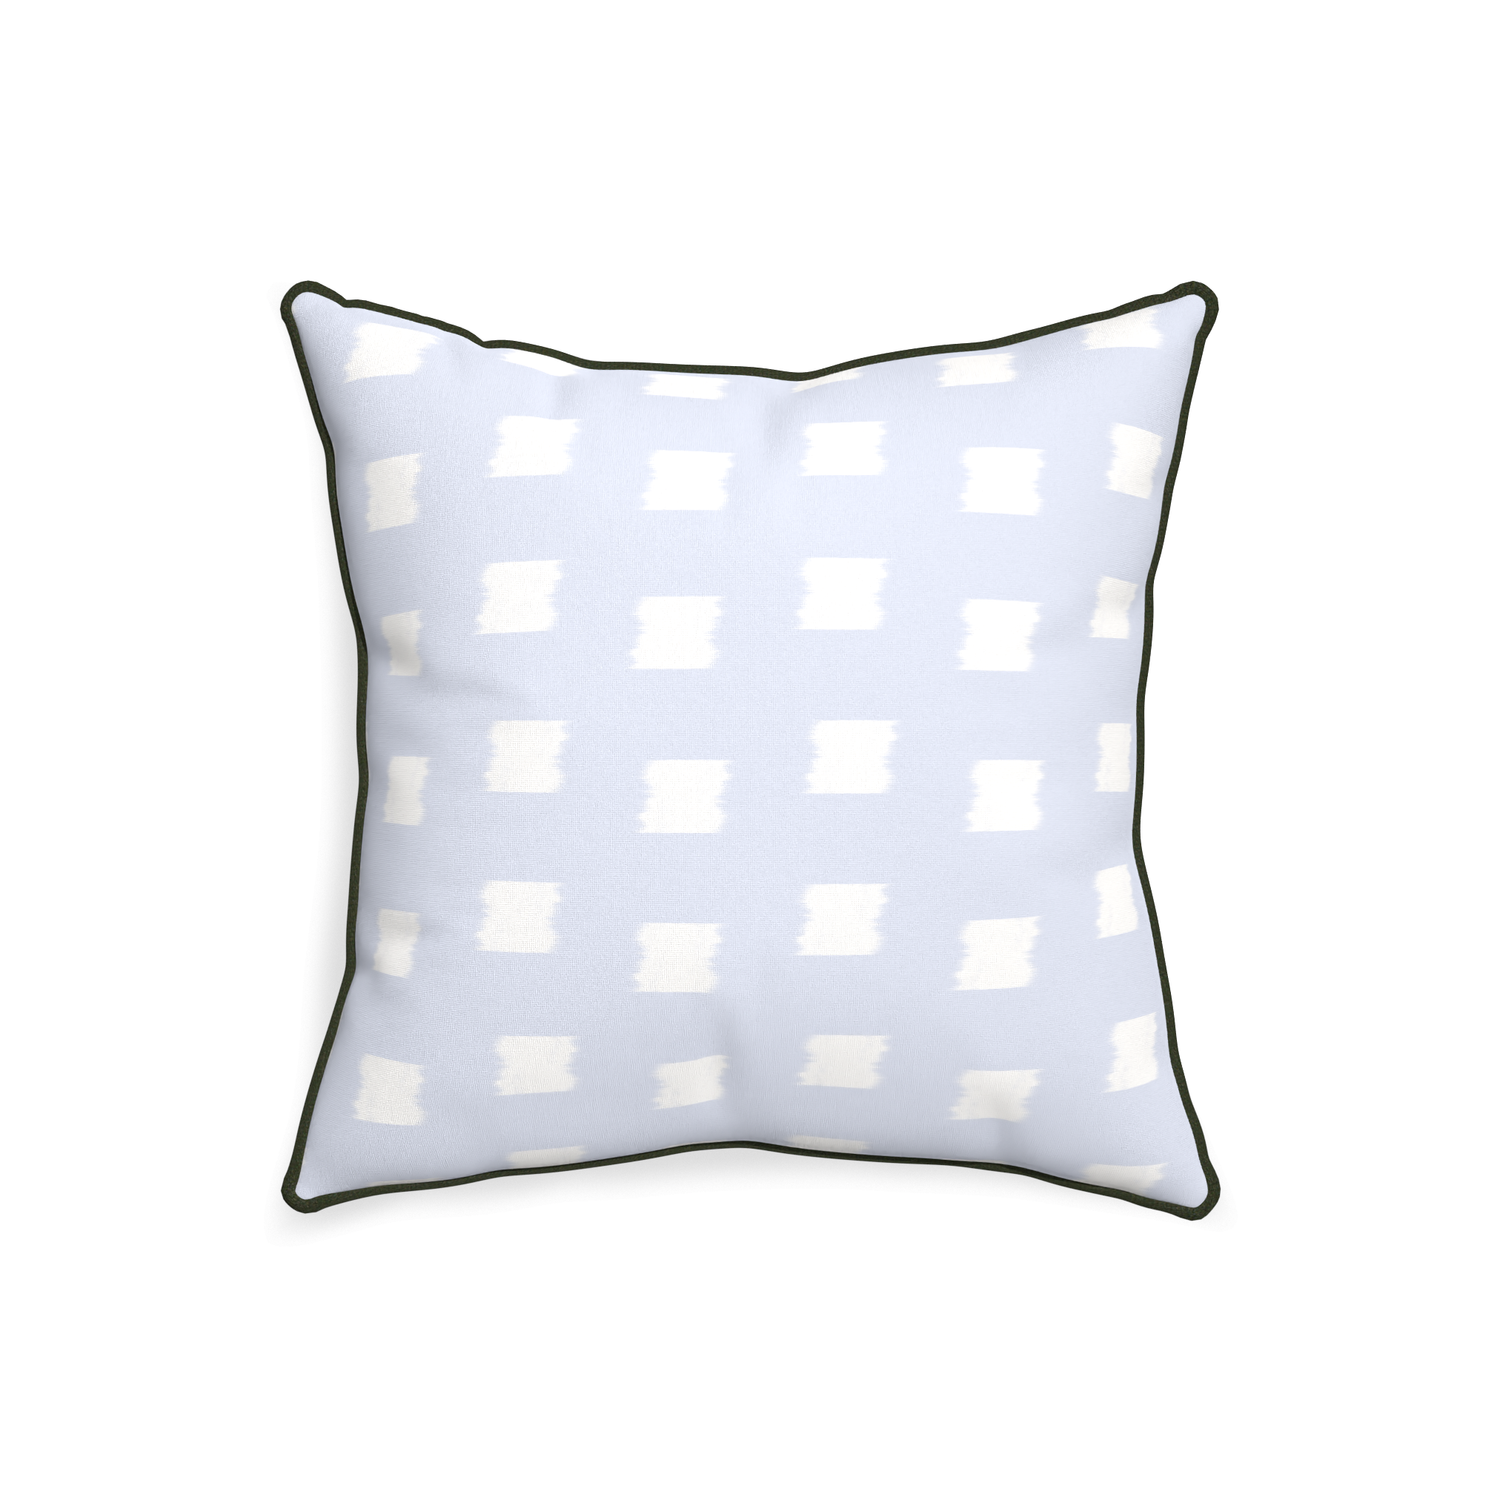 20-square denton custom sky blue patternpillow with f piping on white background